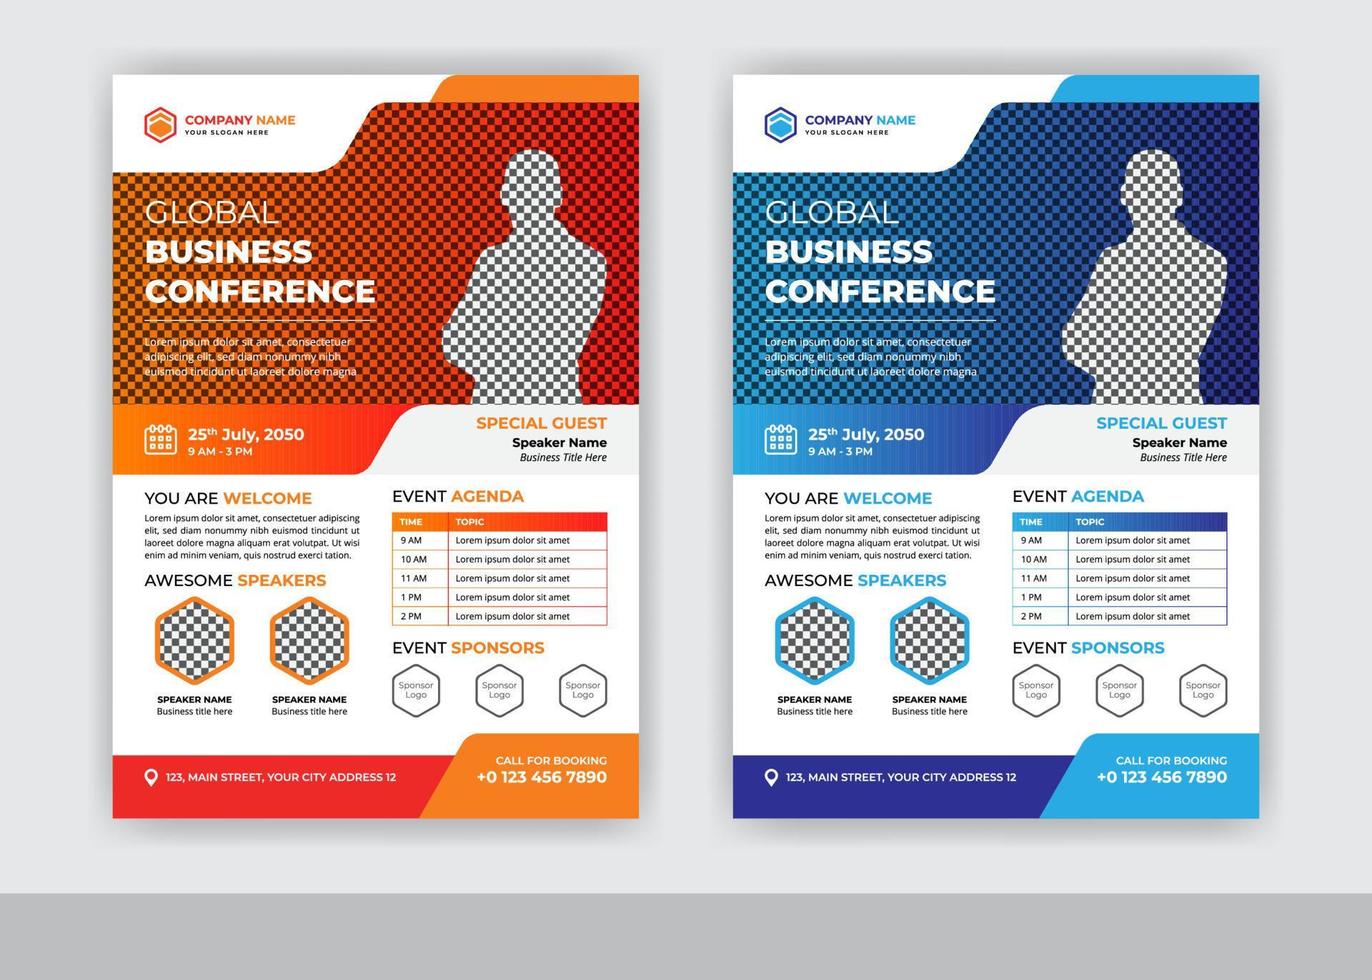 Abstract global business conference and summit flyer template design vector